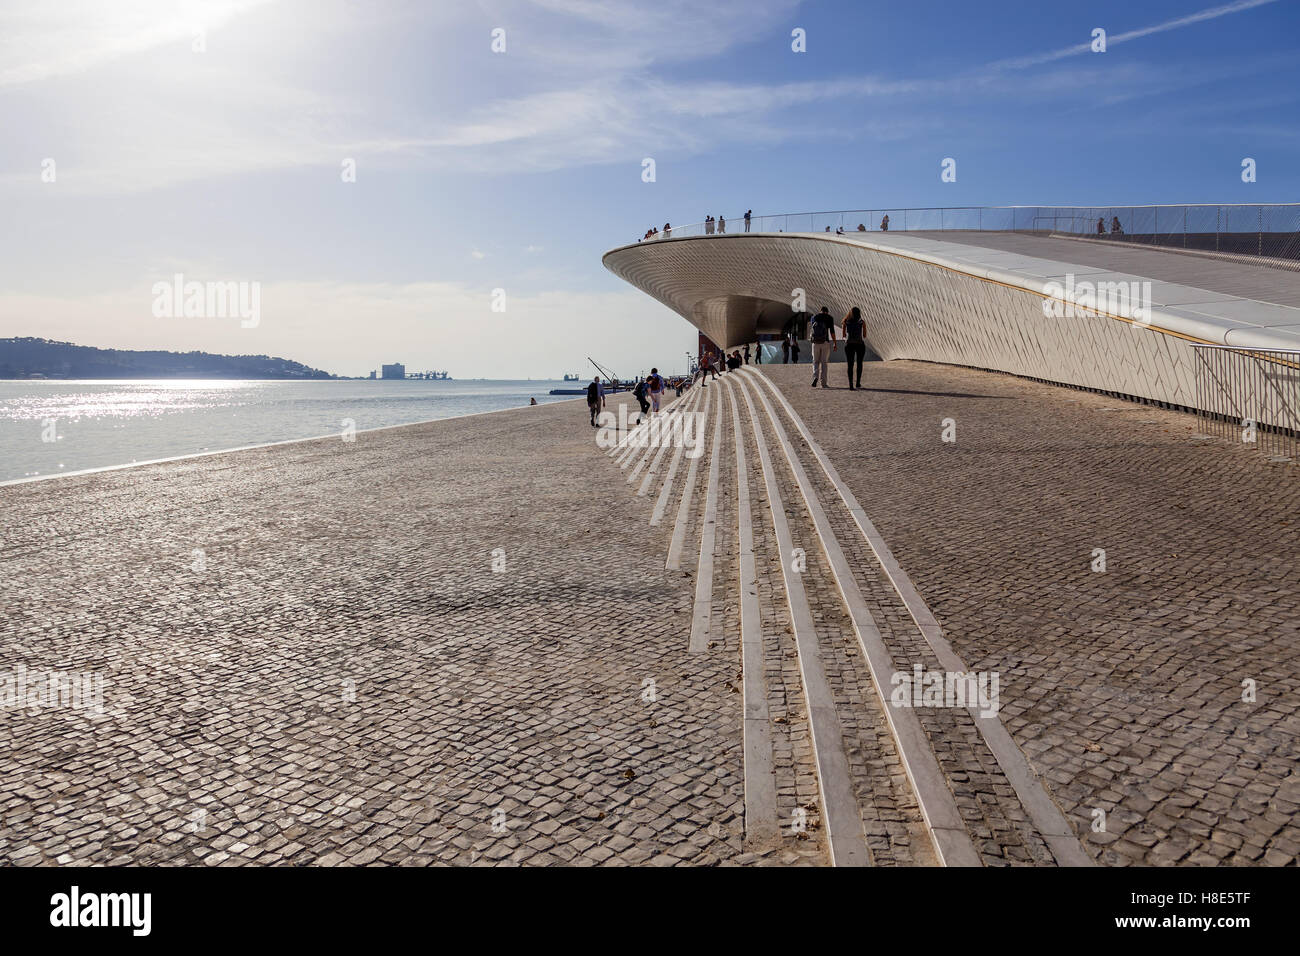 MAAT - Museum of Art, Architecture and Technology. Designed by the British architect Amanda Levete. Lisbon, Portugal. Stock Photo